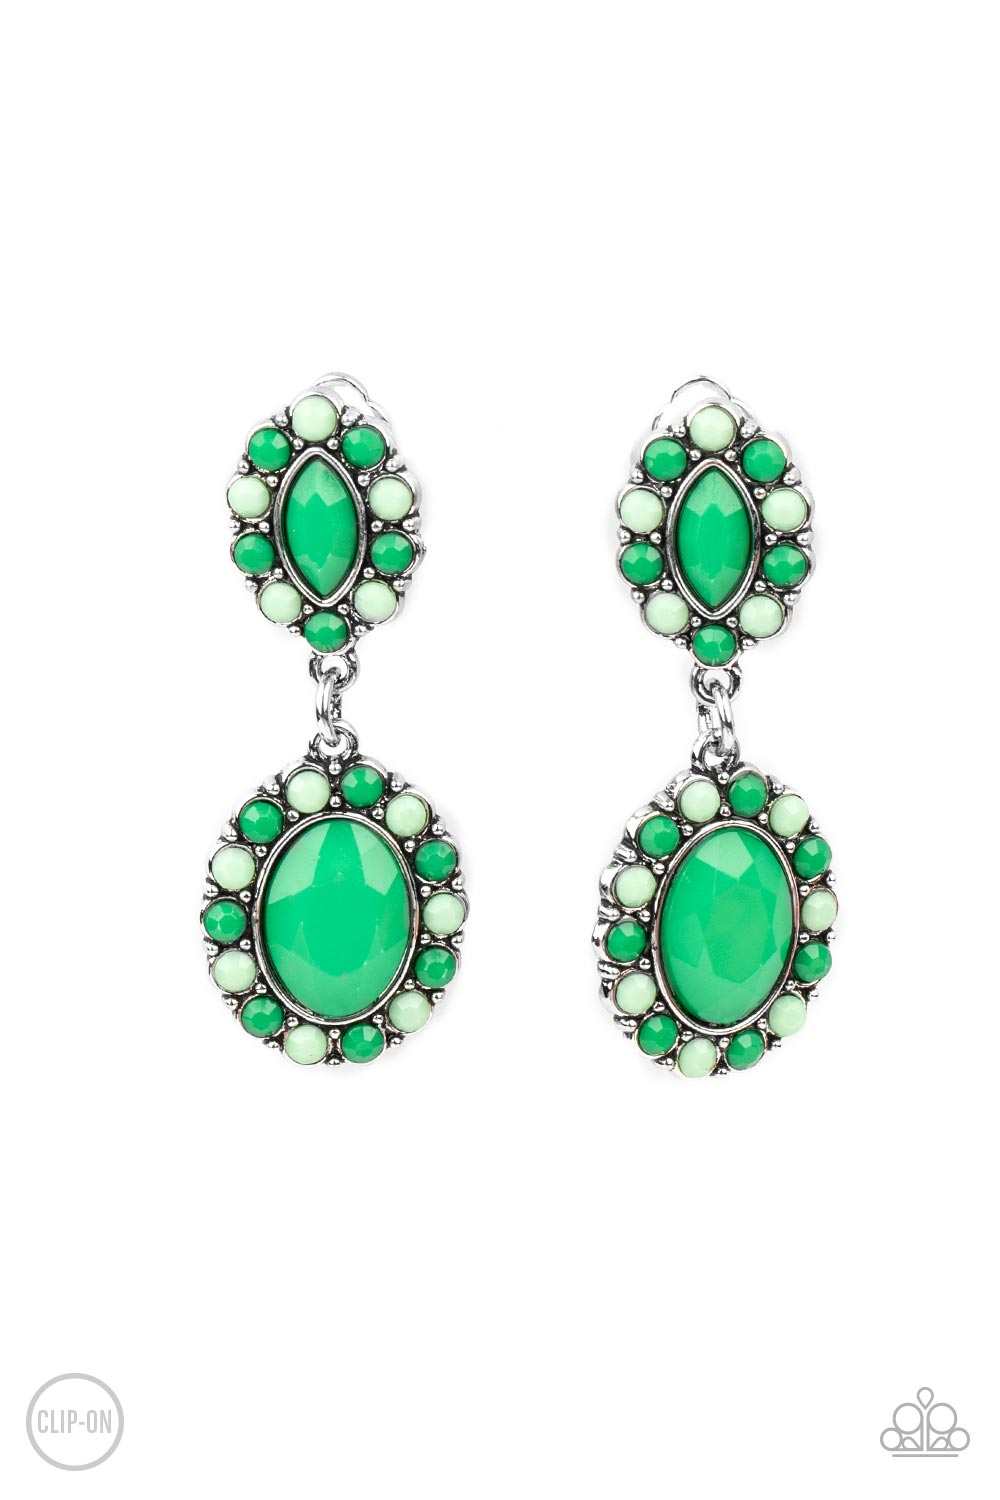 Positively Pampered - Green clip-on earring1792